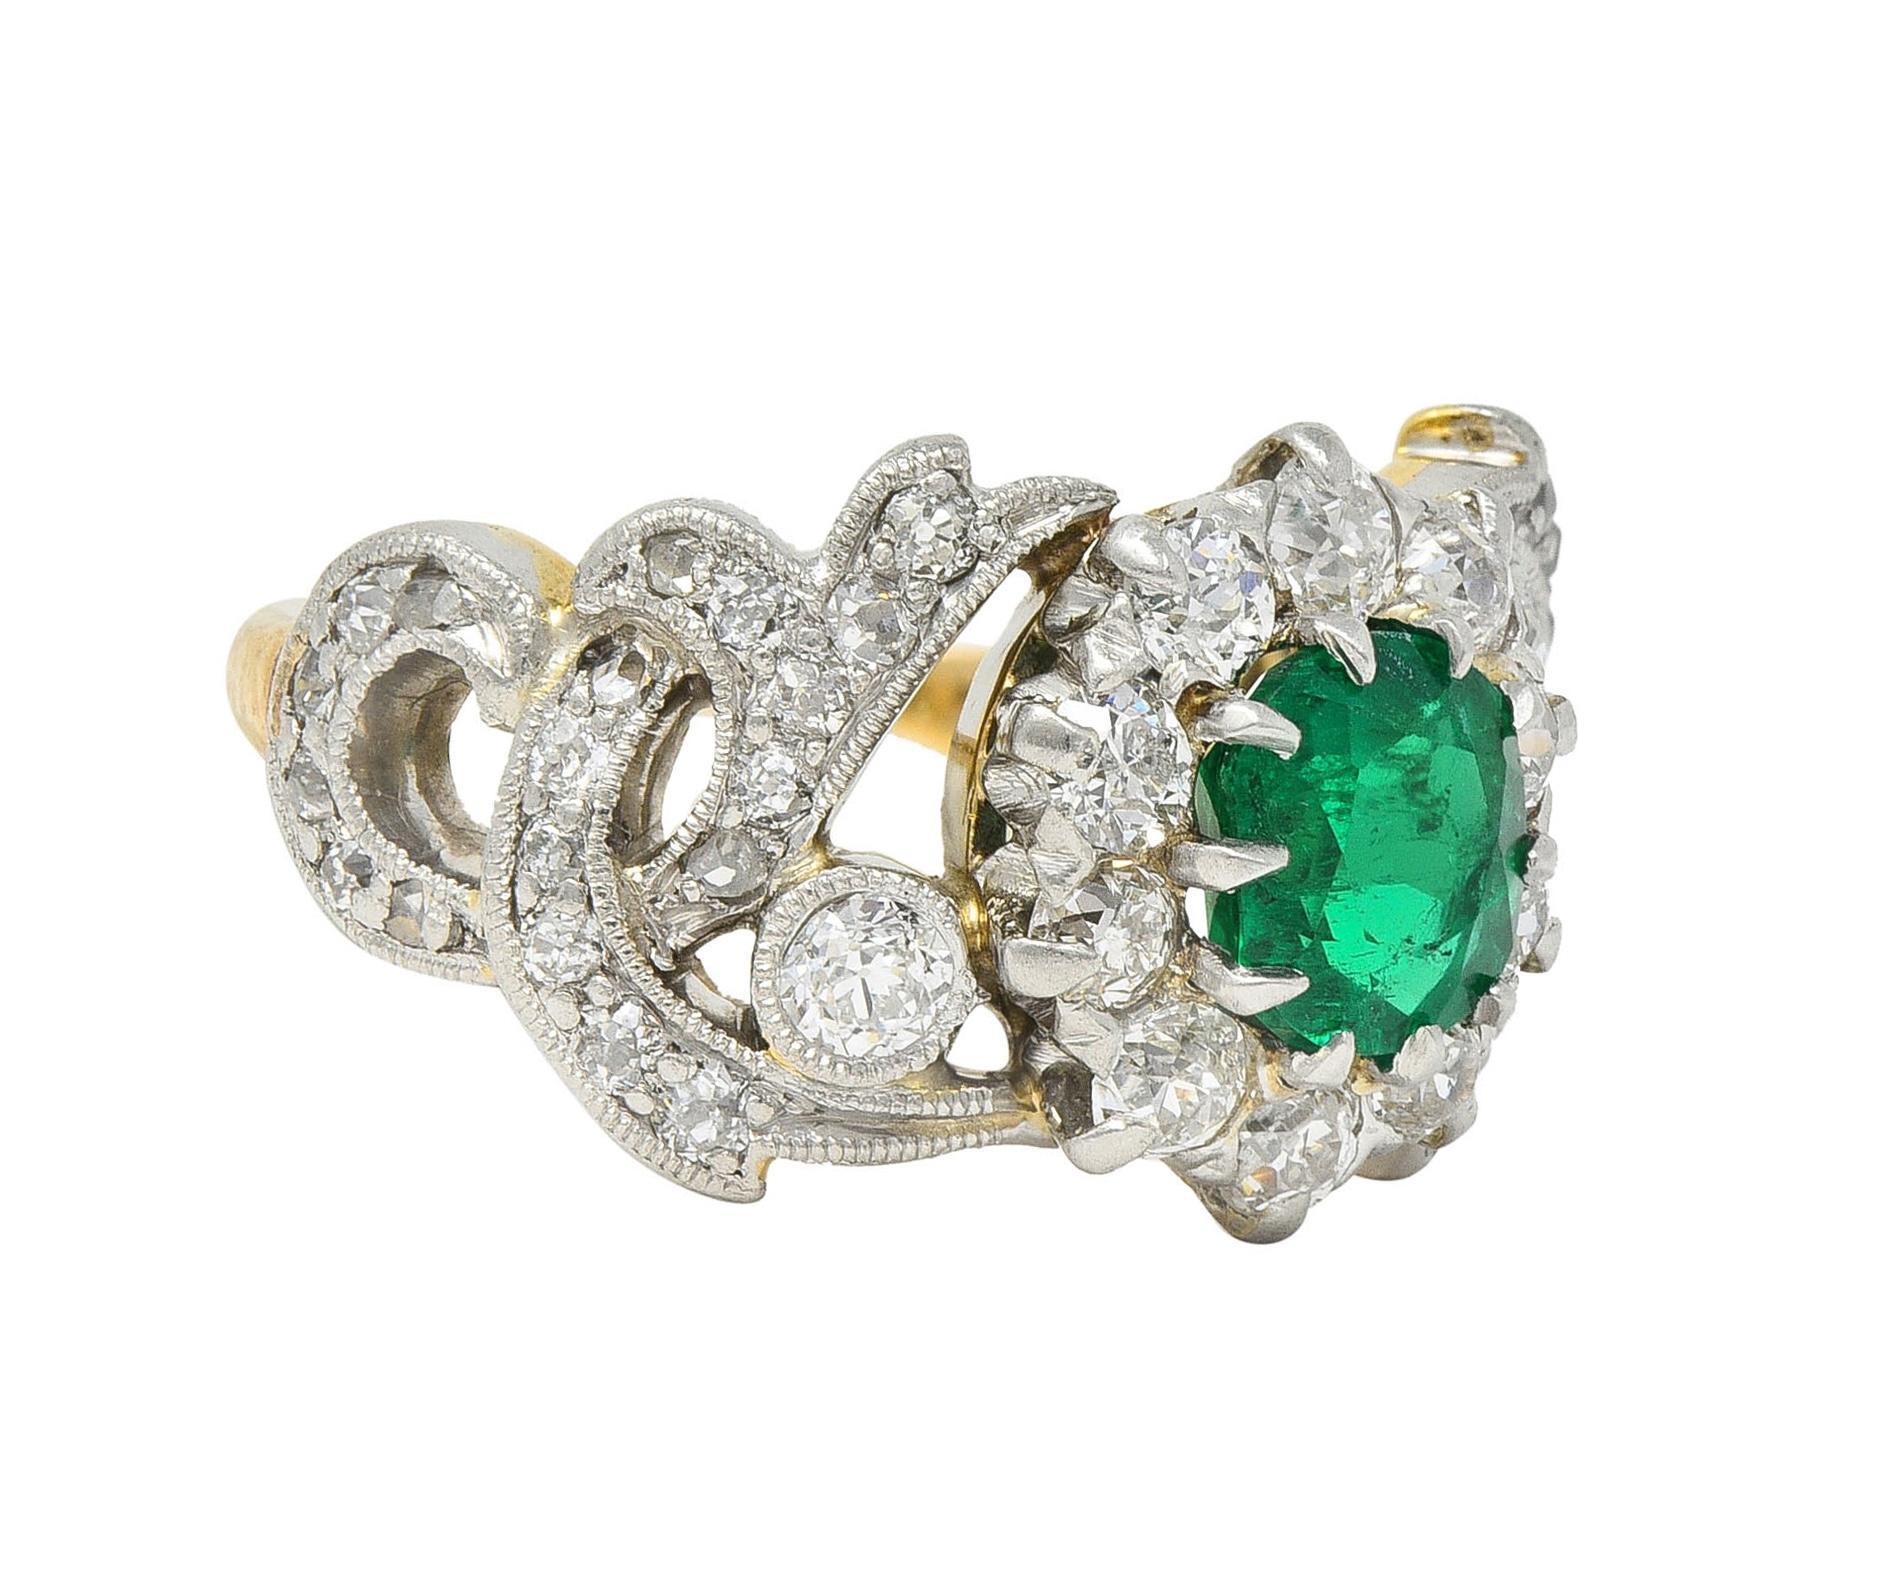 Centering a cushion cut emerald weighing approximately 0.81 carat - transparent medium green
Set with platinum talon prongs with a halo surround of prong set old European cut diamonds
Flanked by pierced and platinum-topped scrolling volute motif